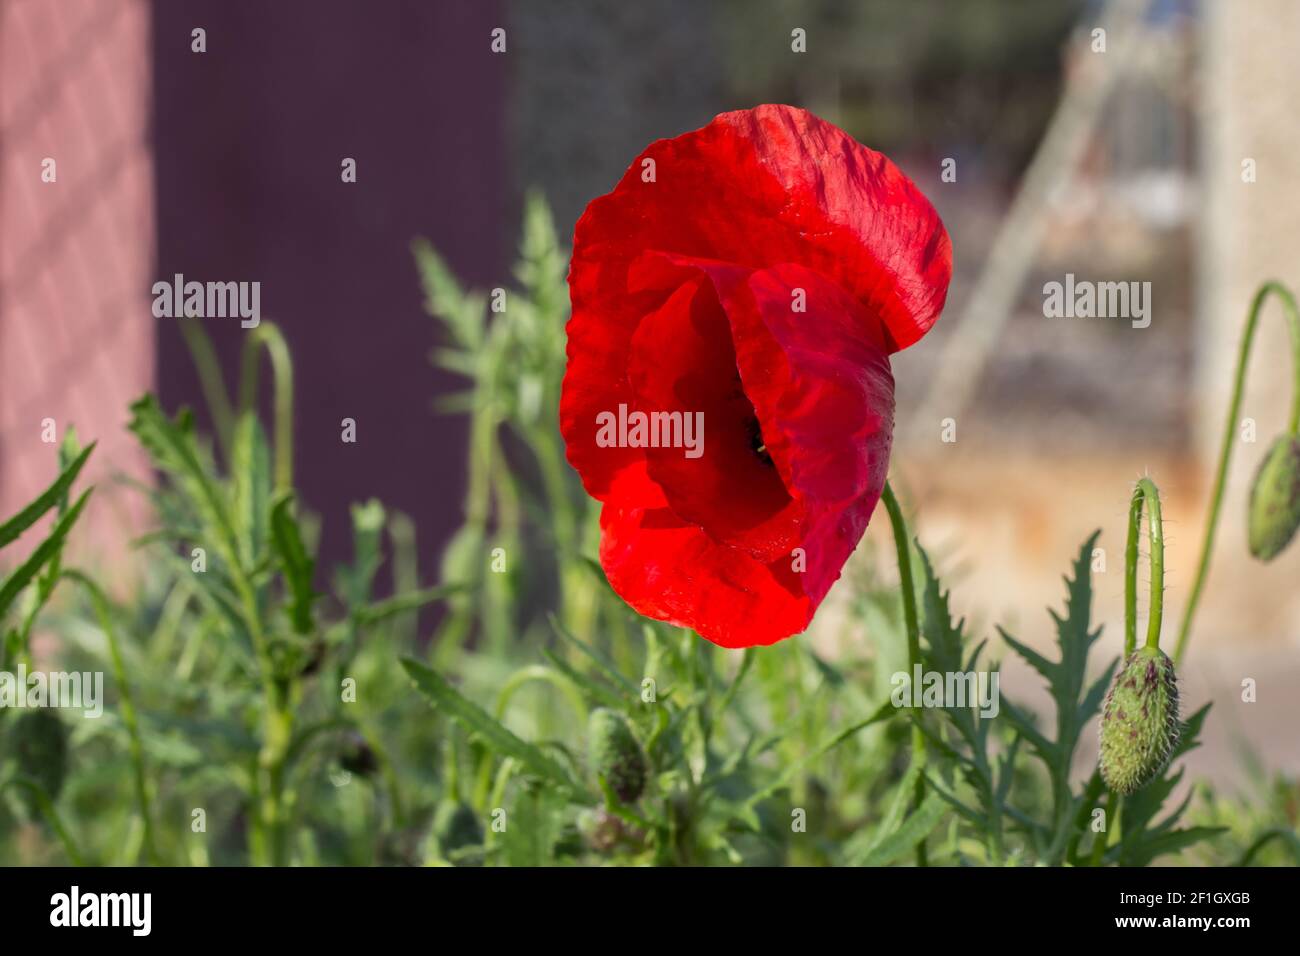 A beautiful view of a red and black poppy flower growing in the street on a blurry background Stock Photo